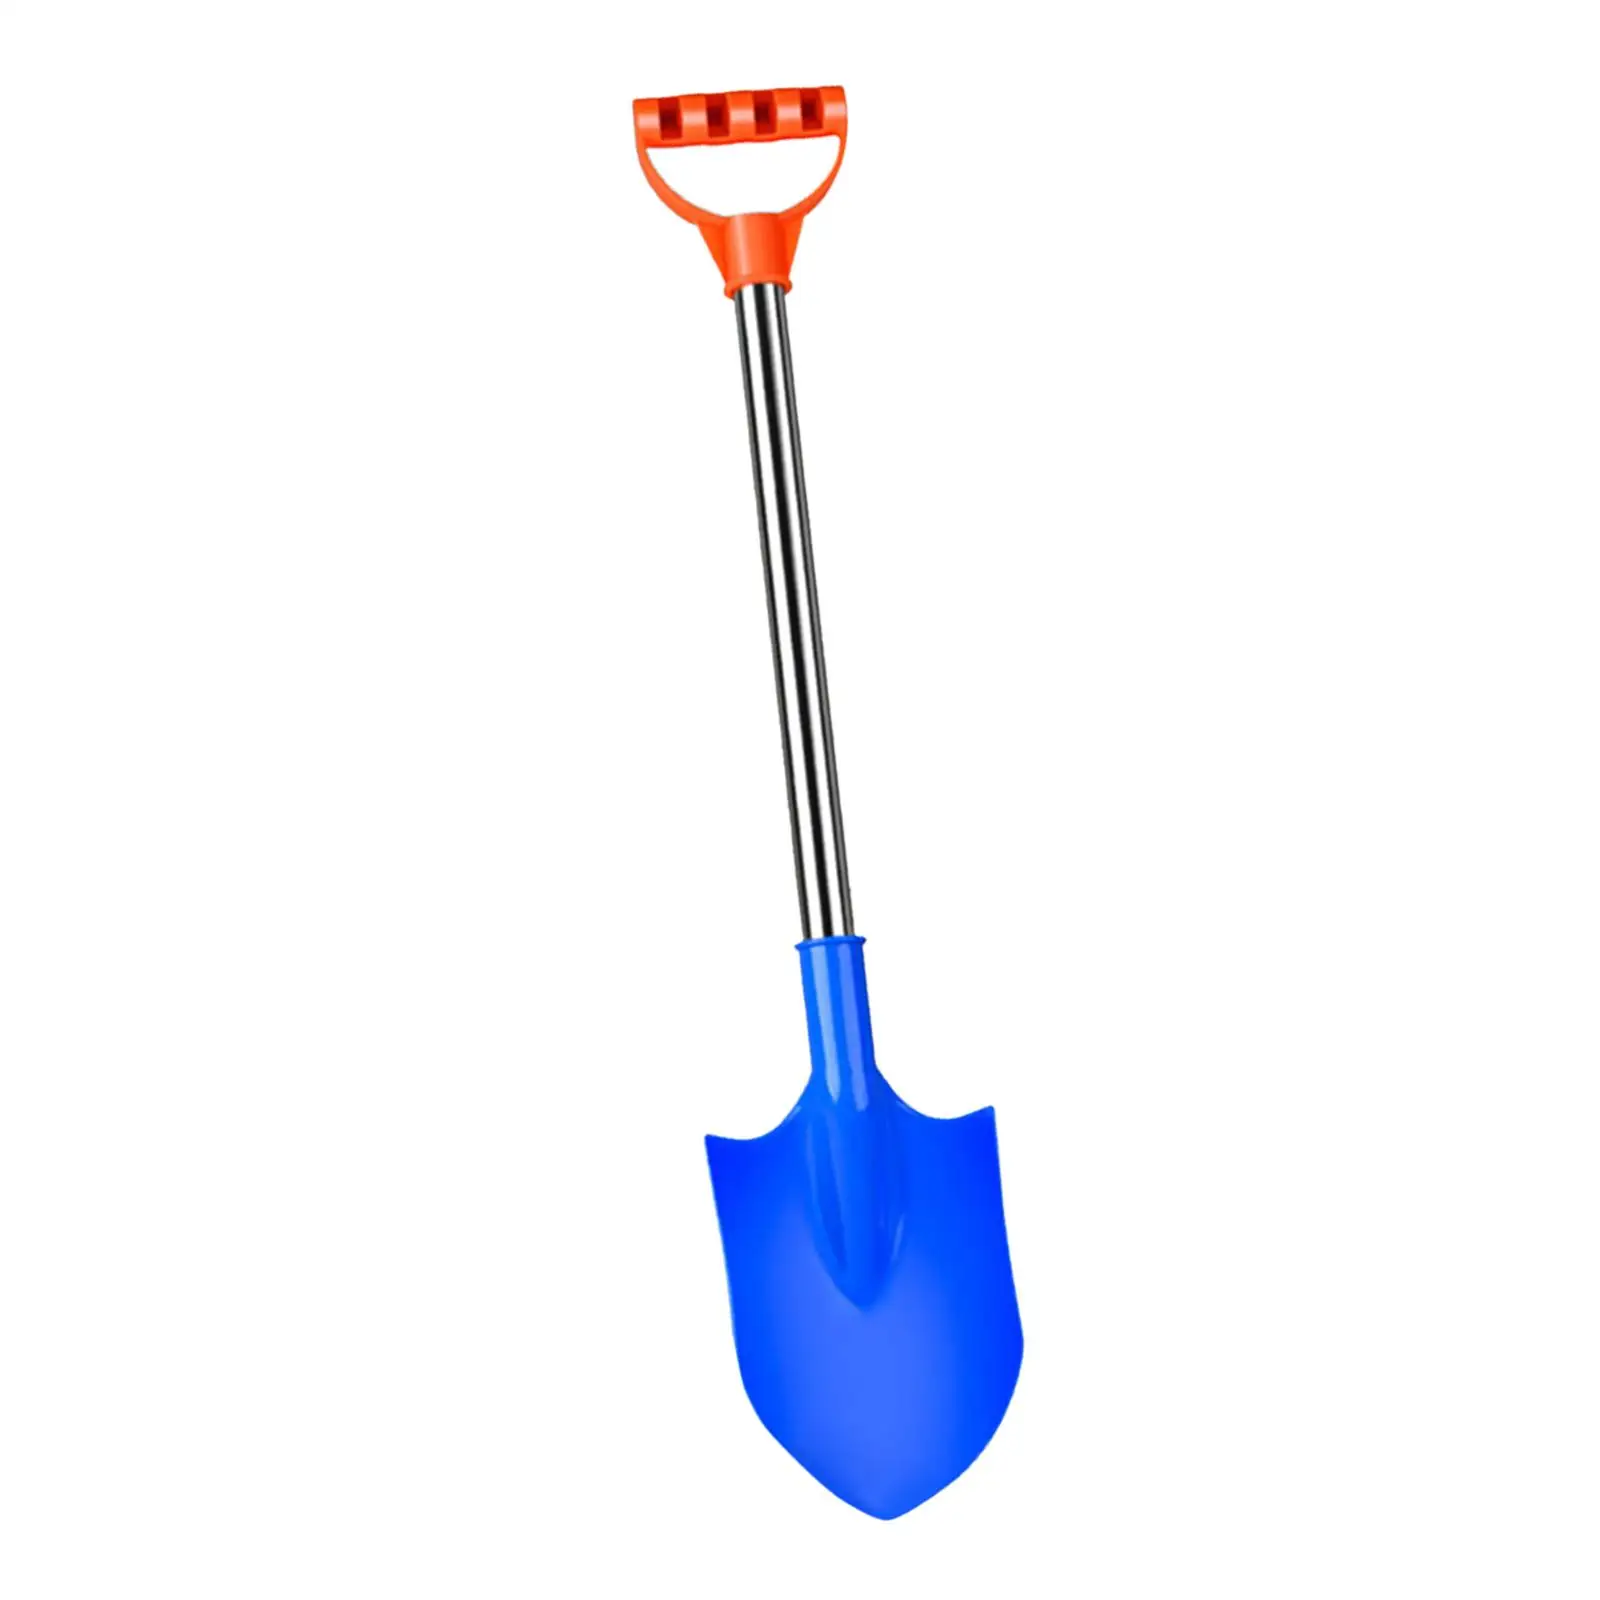 Kids Sand castle Sand Digging Tool Beach Toy for Seaside Playground